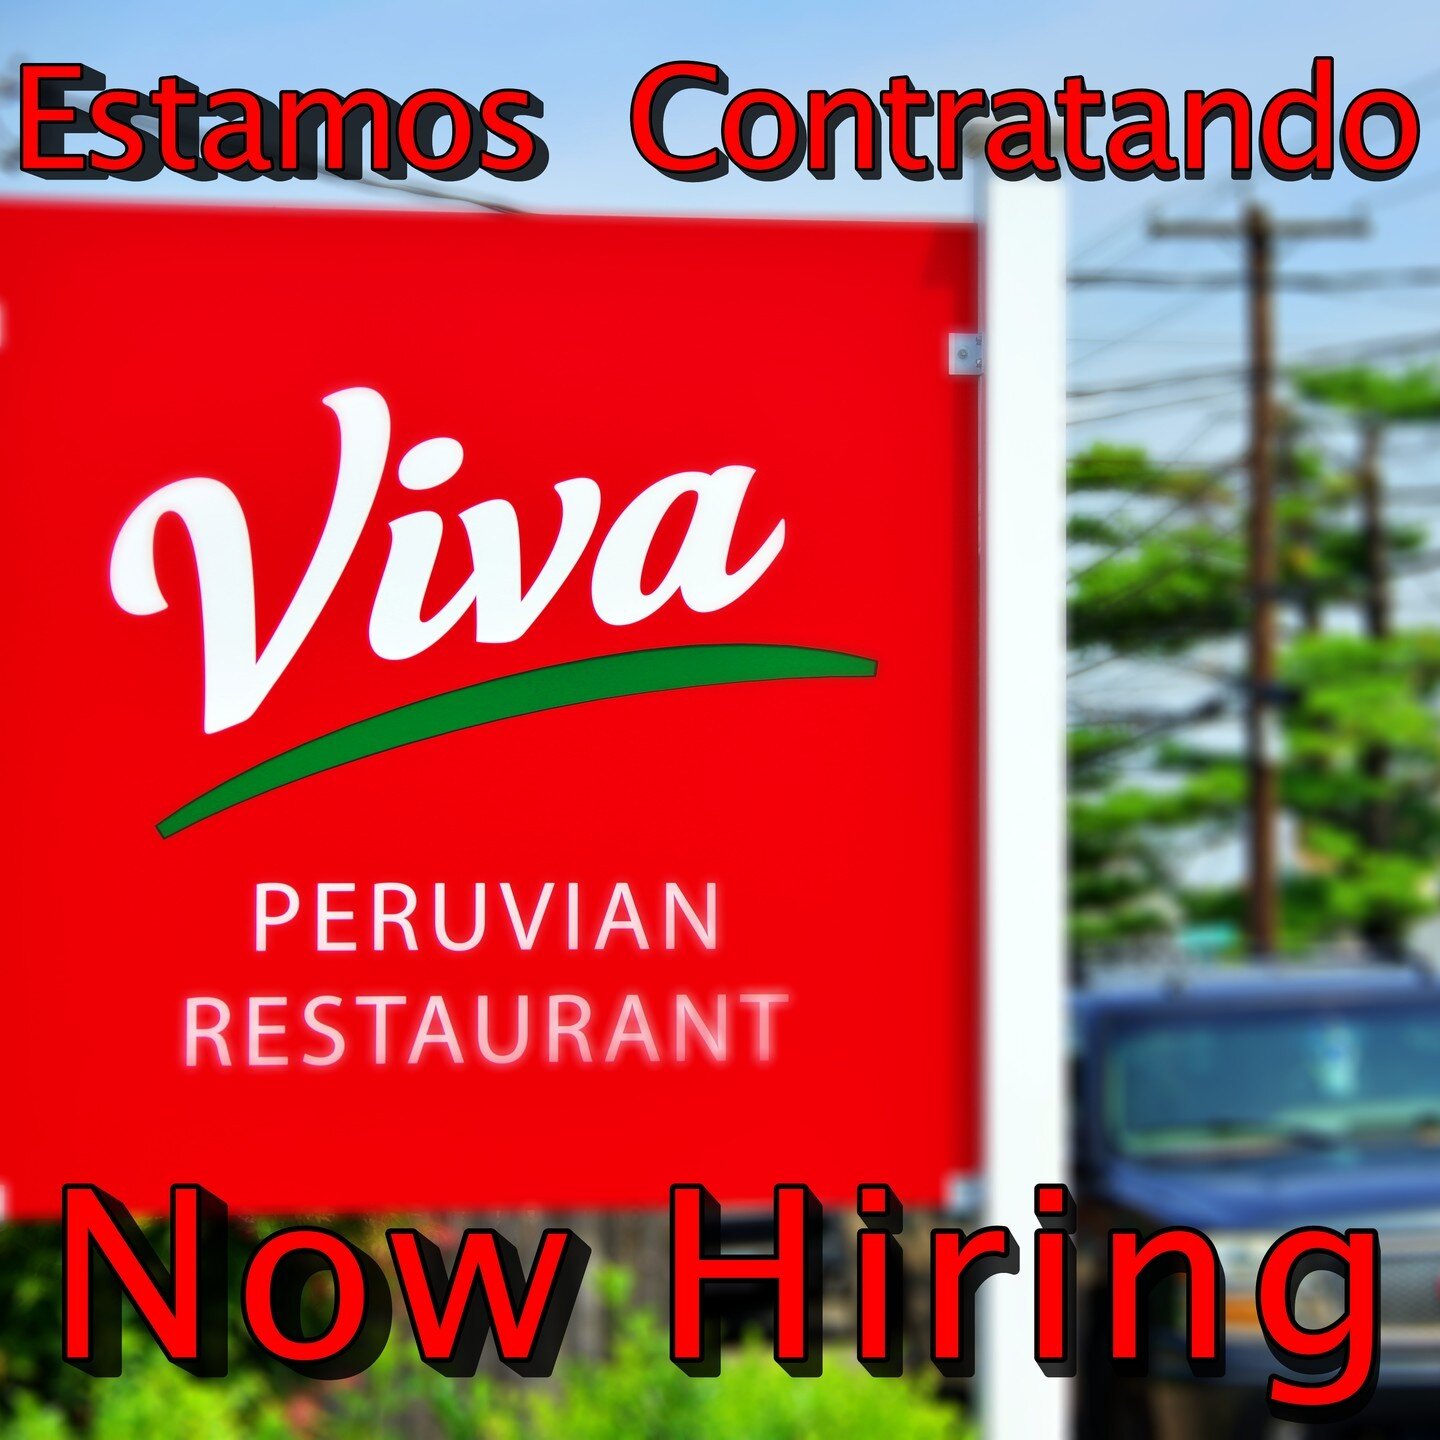 NOW HIRING!!! We are looking for someone to help with our front of house. If you are looking to join the Fiesta Family we are looking for some help.
Must speak English and Spanish. Weekend availability is a must. Great opportunity for a student or se